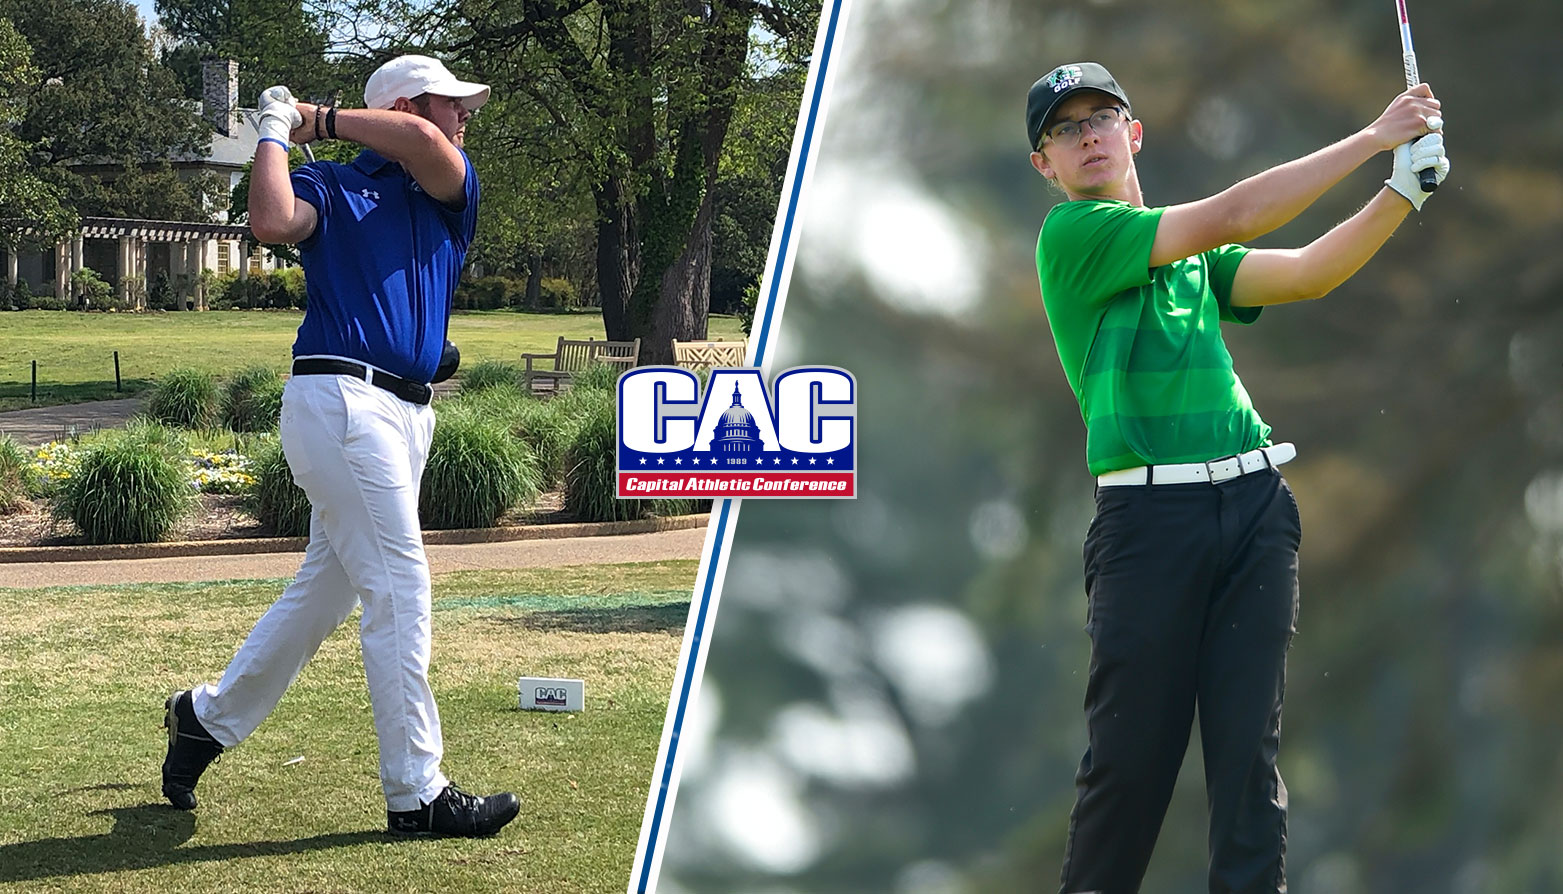 Mary Washington Takes Early Lead at 2019 CAC Men's Golf Championship in Williamsburg